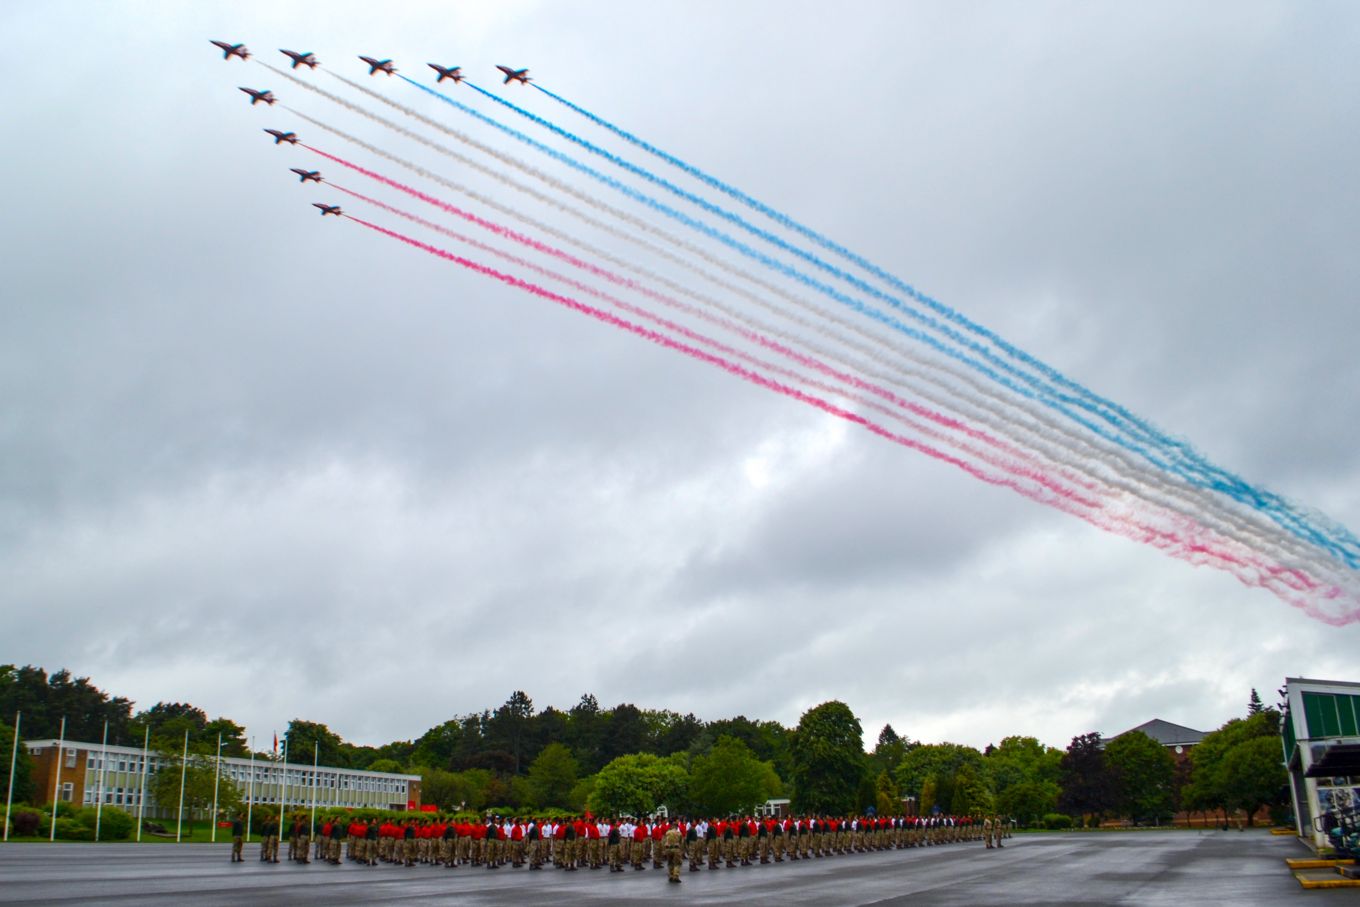 The flypast of the Infantry Training Centre, Catterick Garrison.